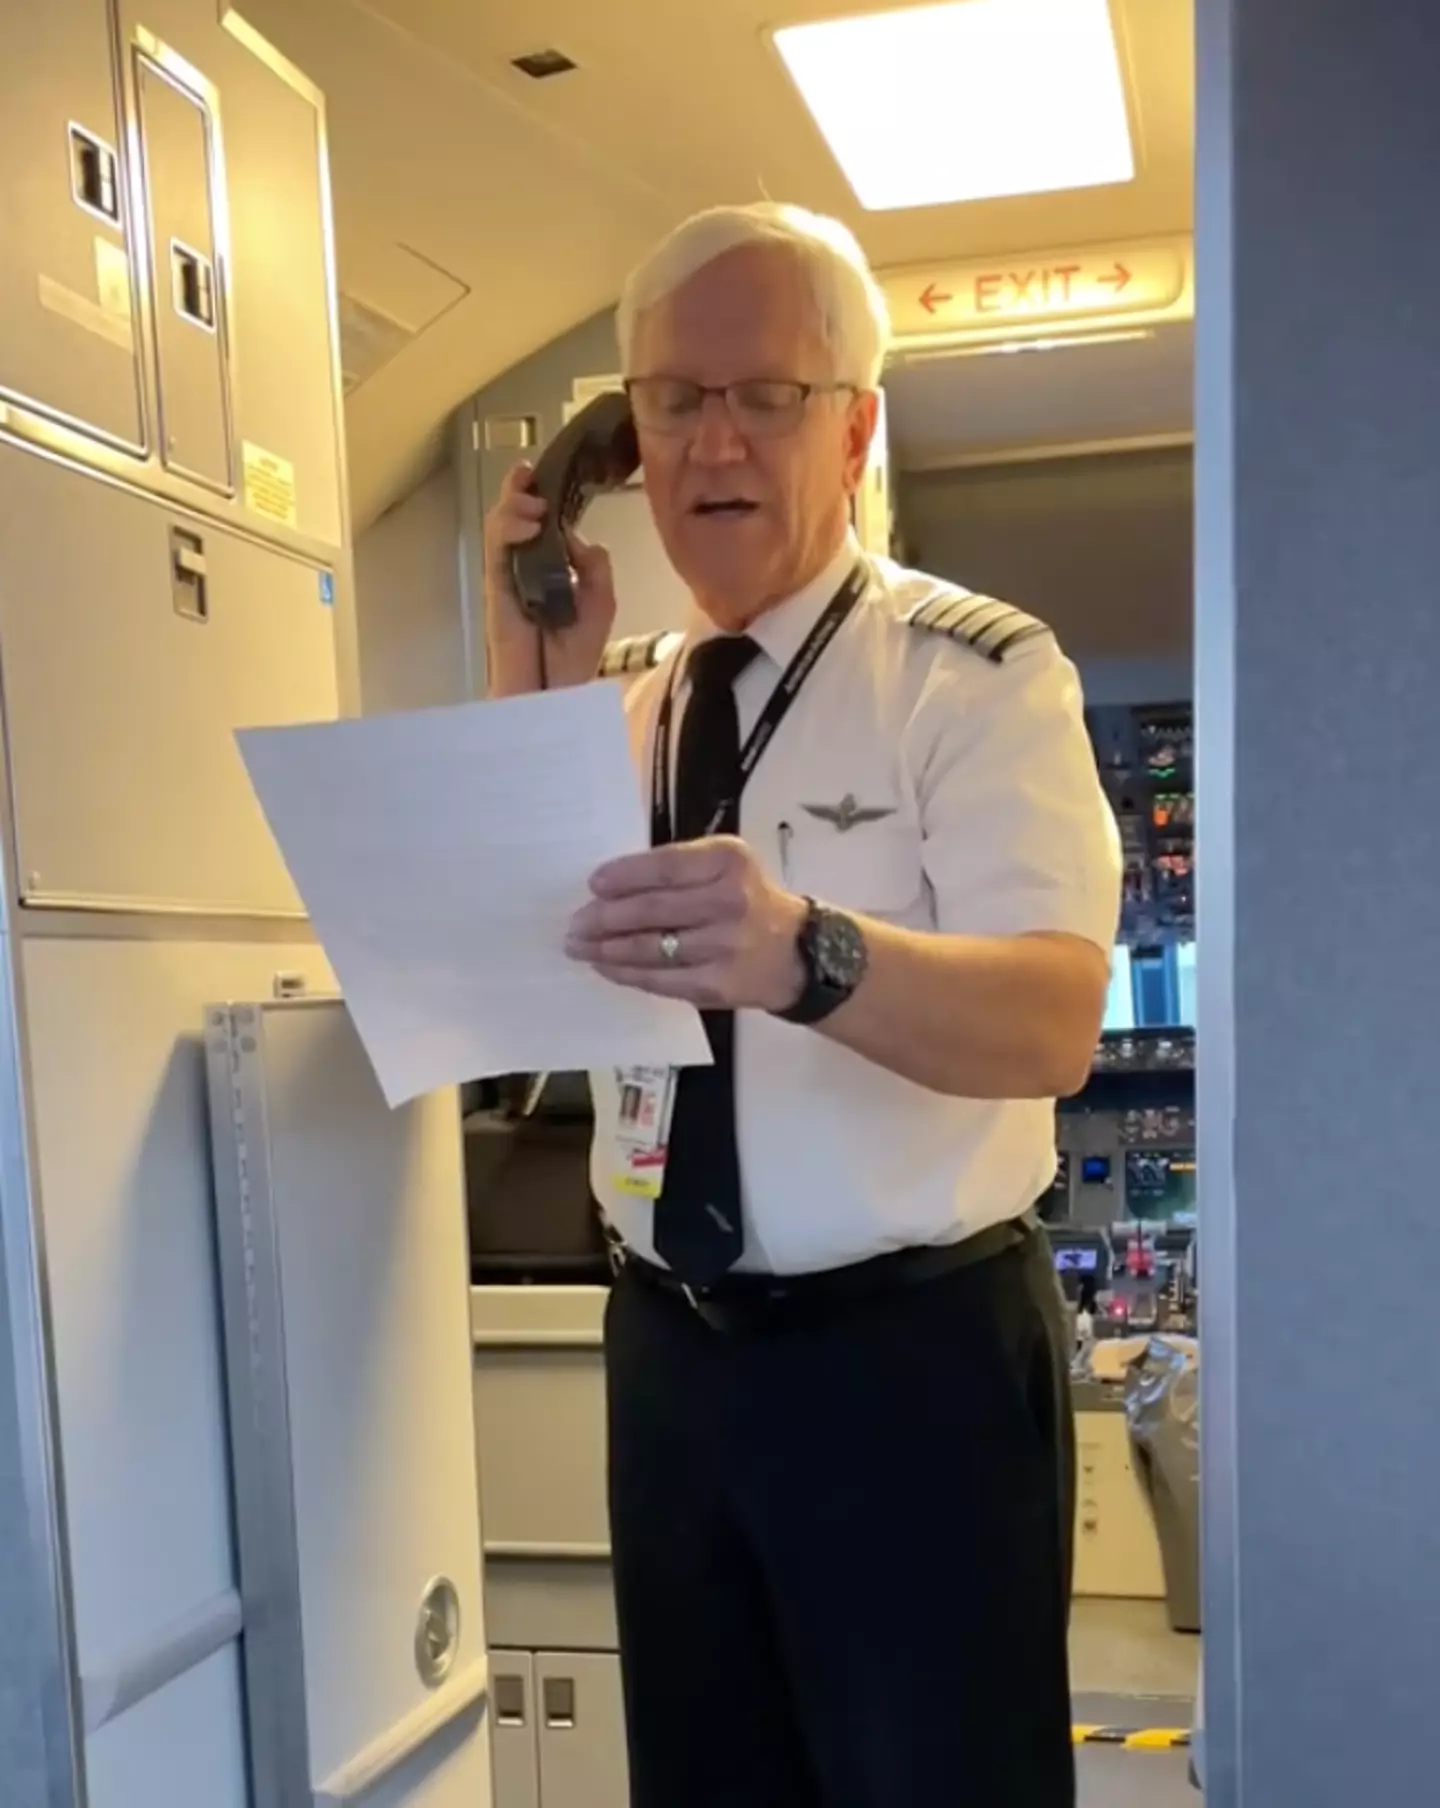 The pilot couldn't help but get emotional.